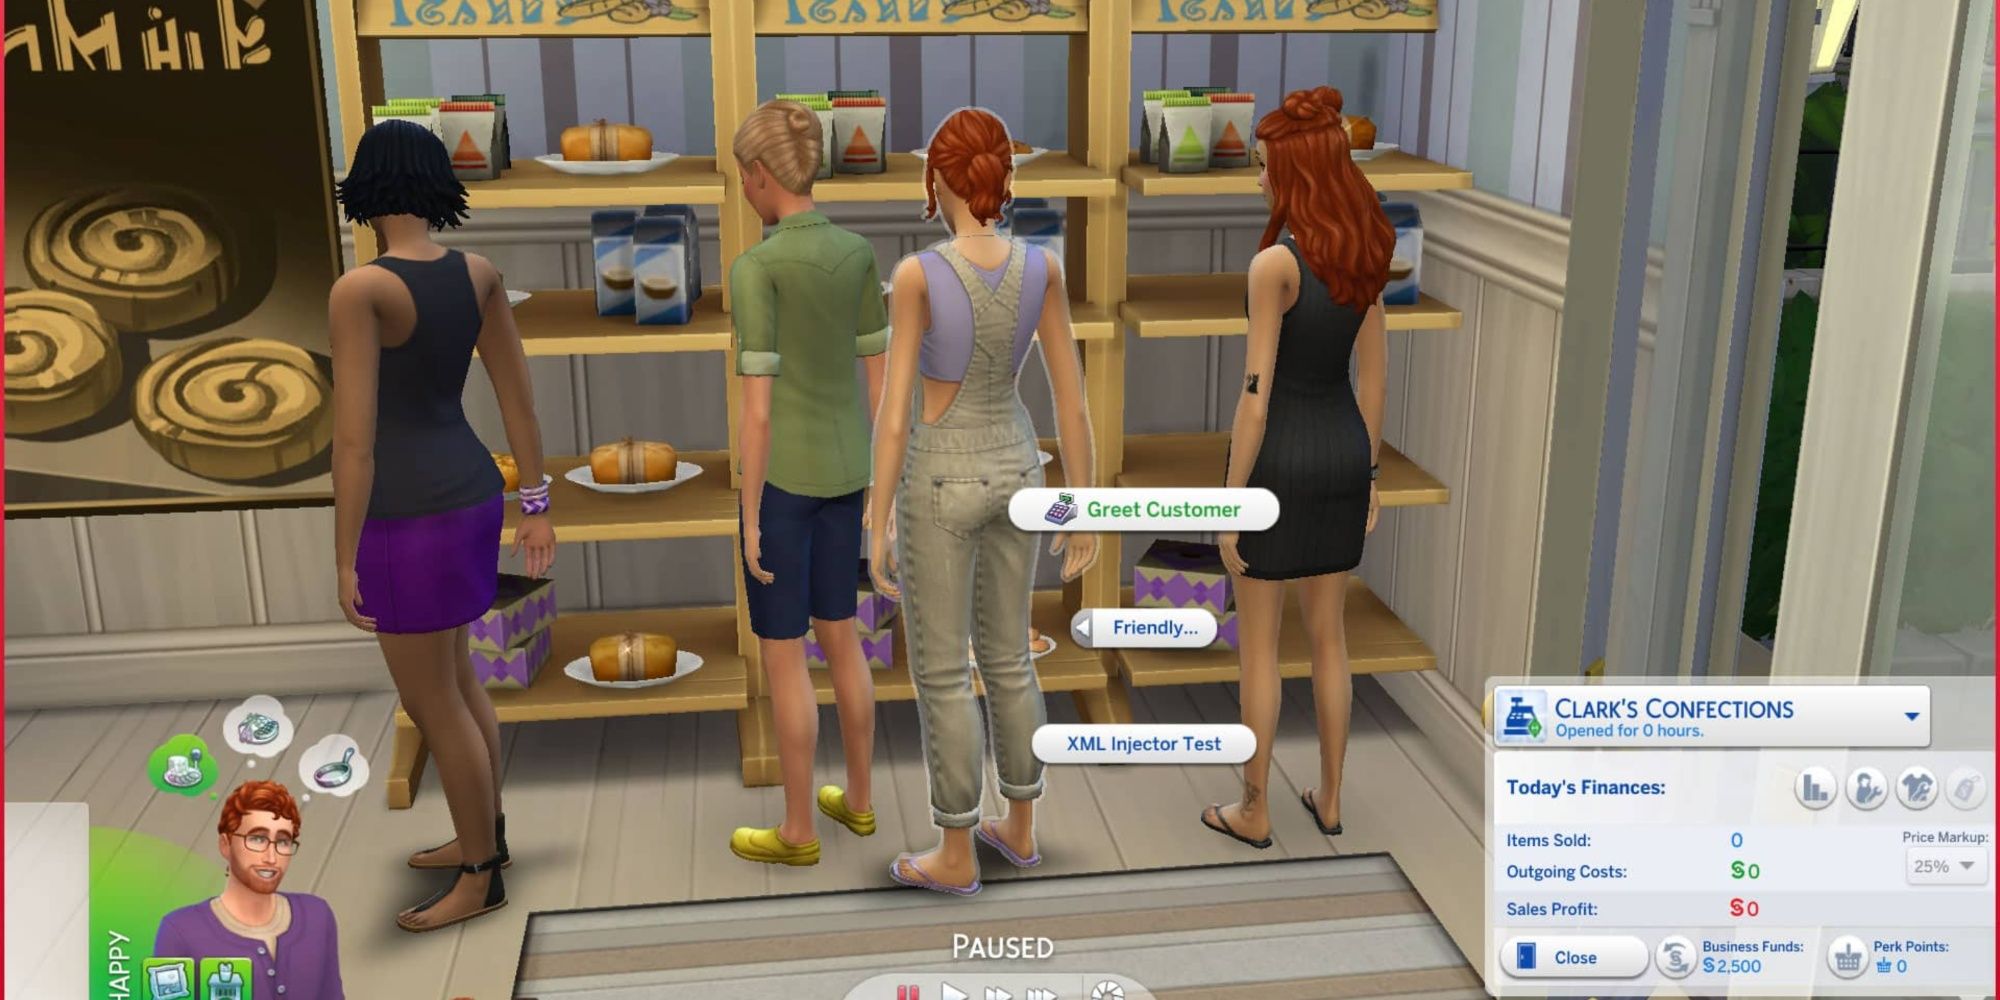 The Sims 4 customer greeting options for running a retail store